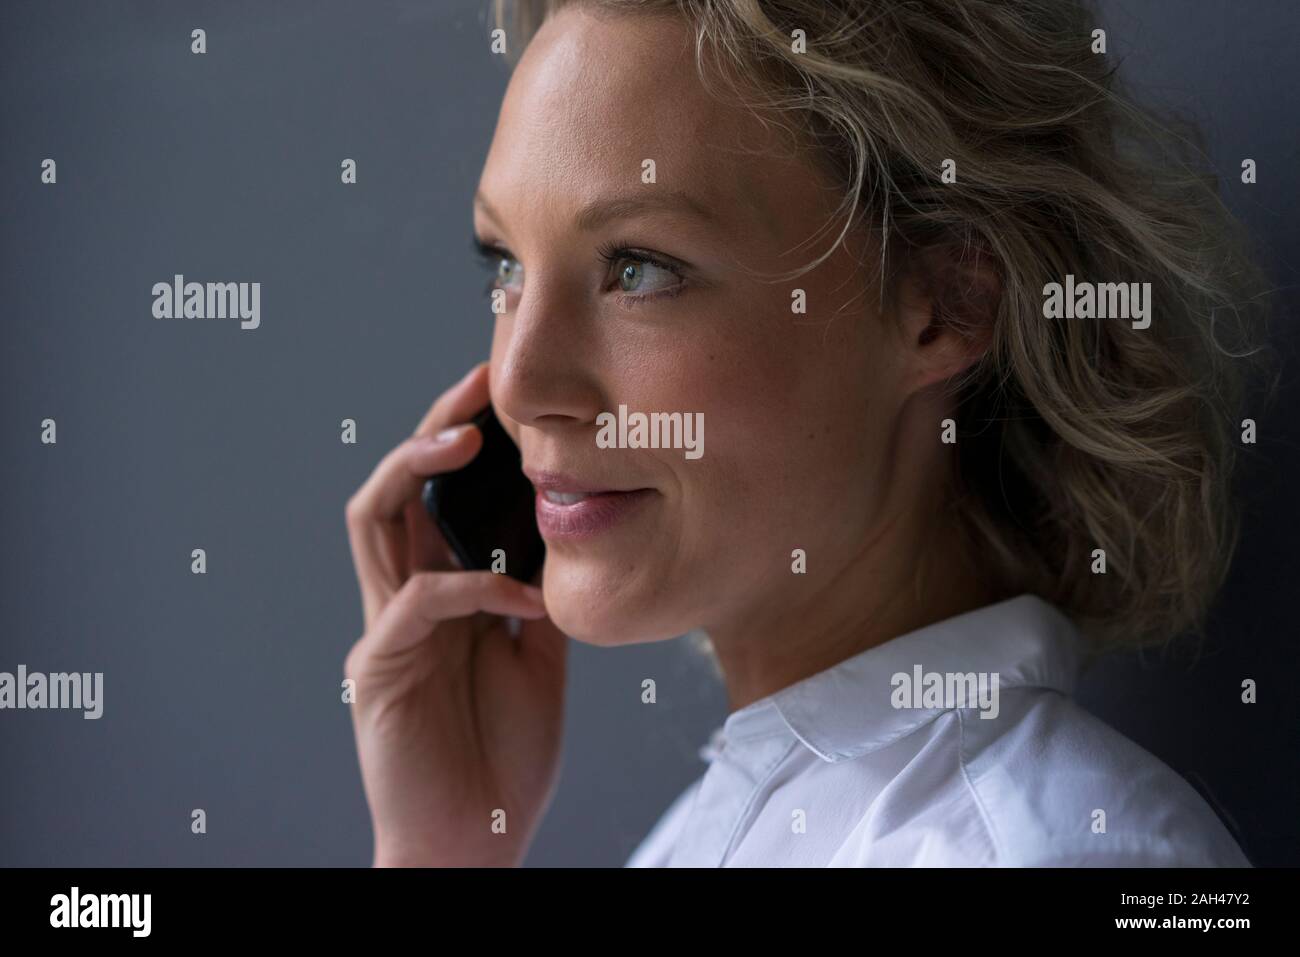 Portrait of smiling young businesswoman on the phone Stock Photo